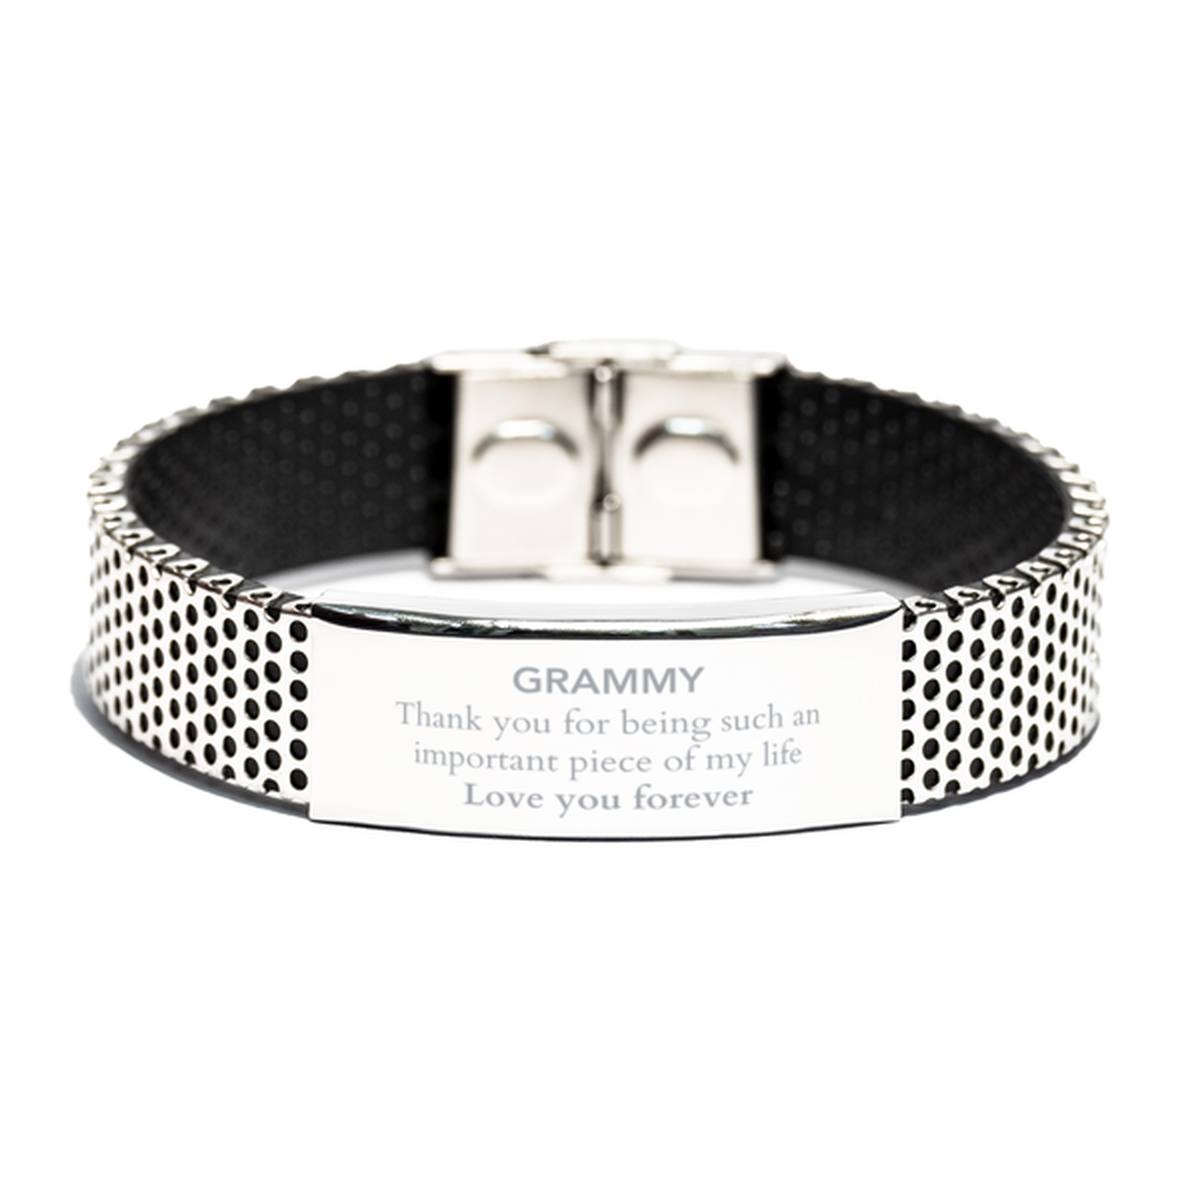 Appropriate Grammy Stainless Steel Bracelet Epic Birthday Gifts for Grammy Thank you for being such an important piece of my life Grammy Christmas Mothers Fathers Day